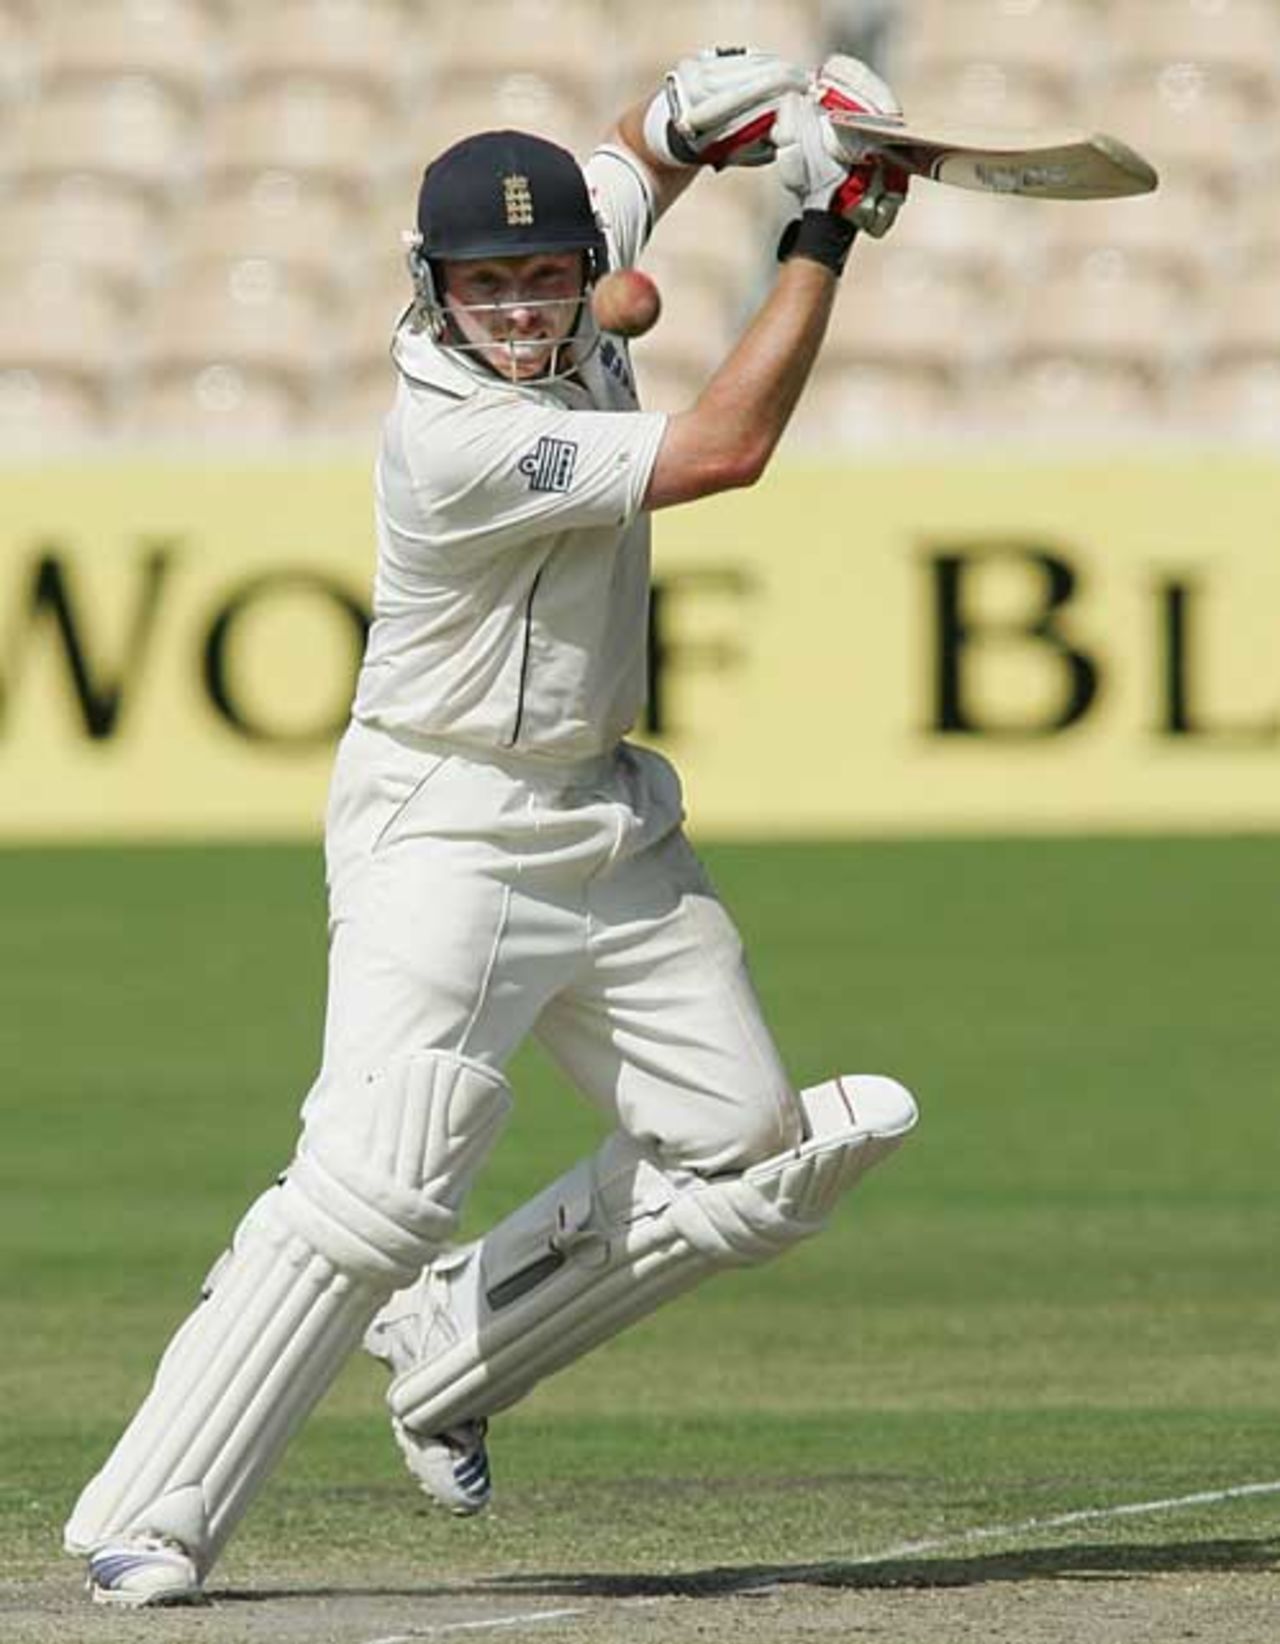 Textbook: Ian Bell forces through the off side during his century, South Australia v England XI, Adelaide Oval, November 18, 2006